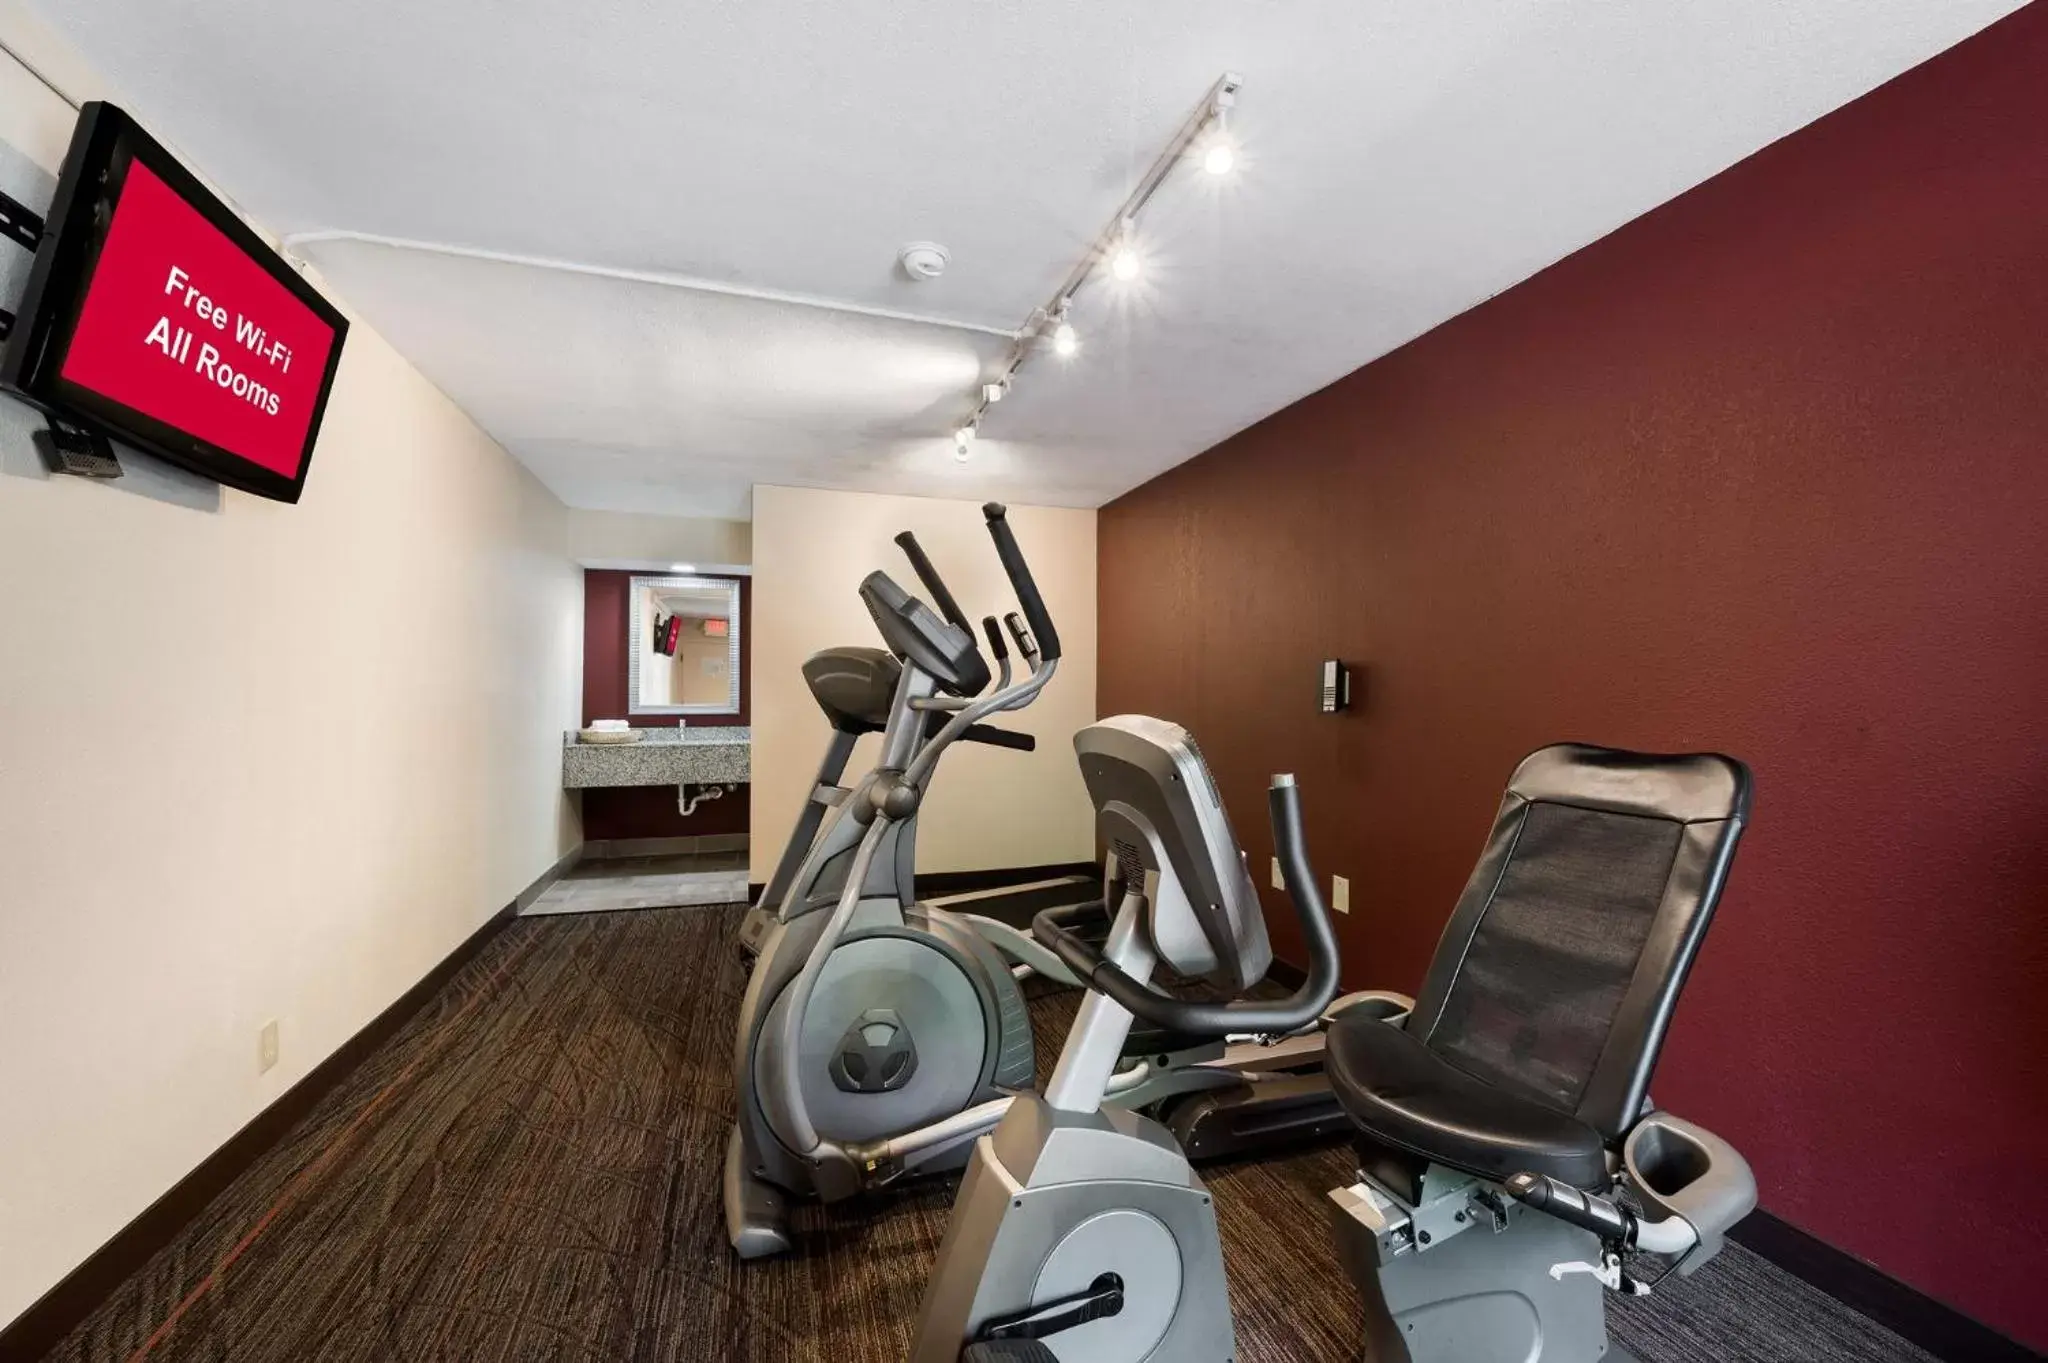 Fitness centre/facilities, Fitness Center/Facilities in Red Roof Inn Birmingham South